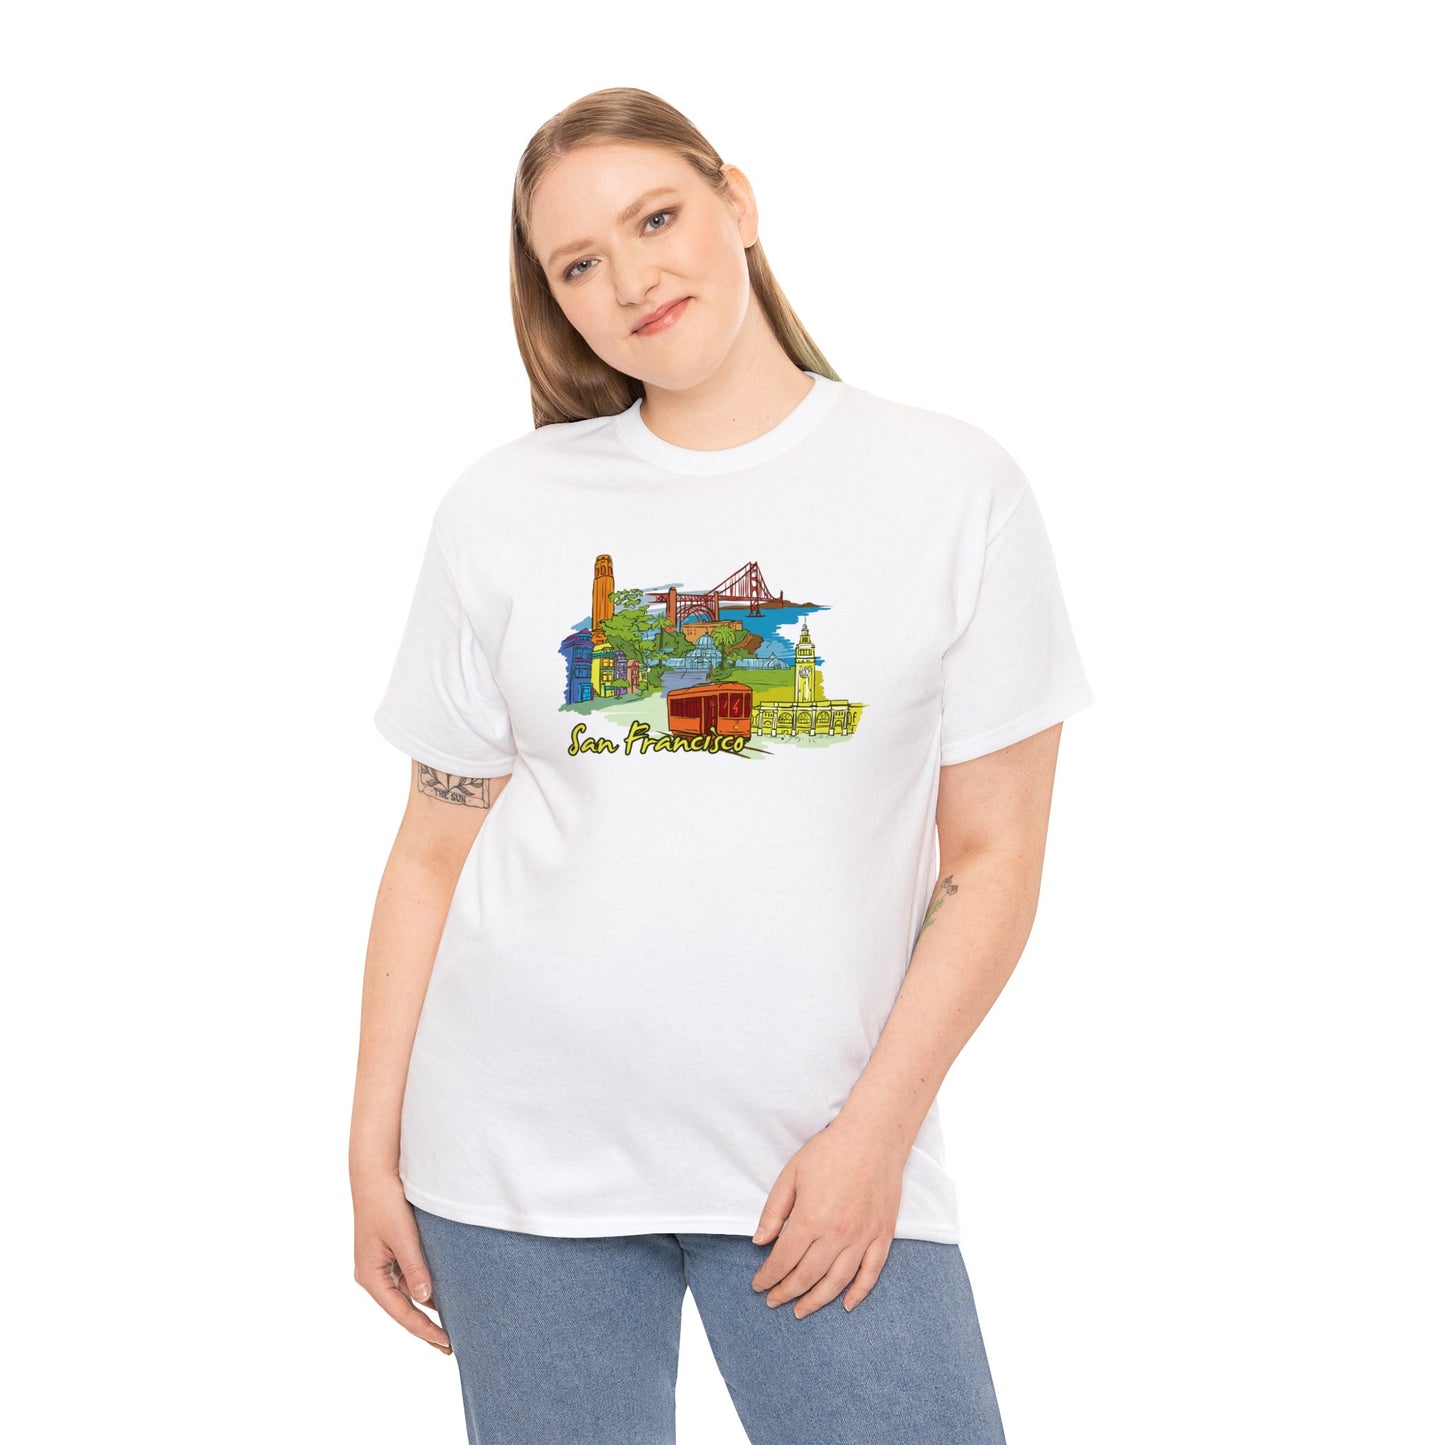 Stylish and Comfortable San Francisco T-Shirt for Your Urban Adventures!